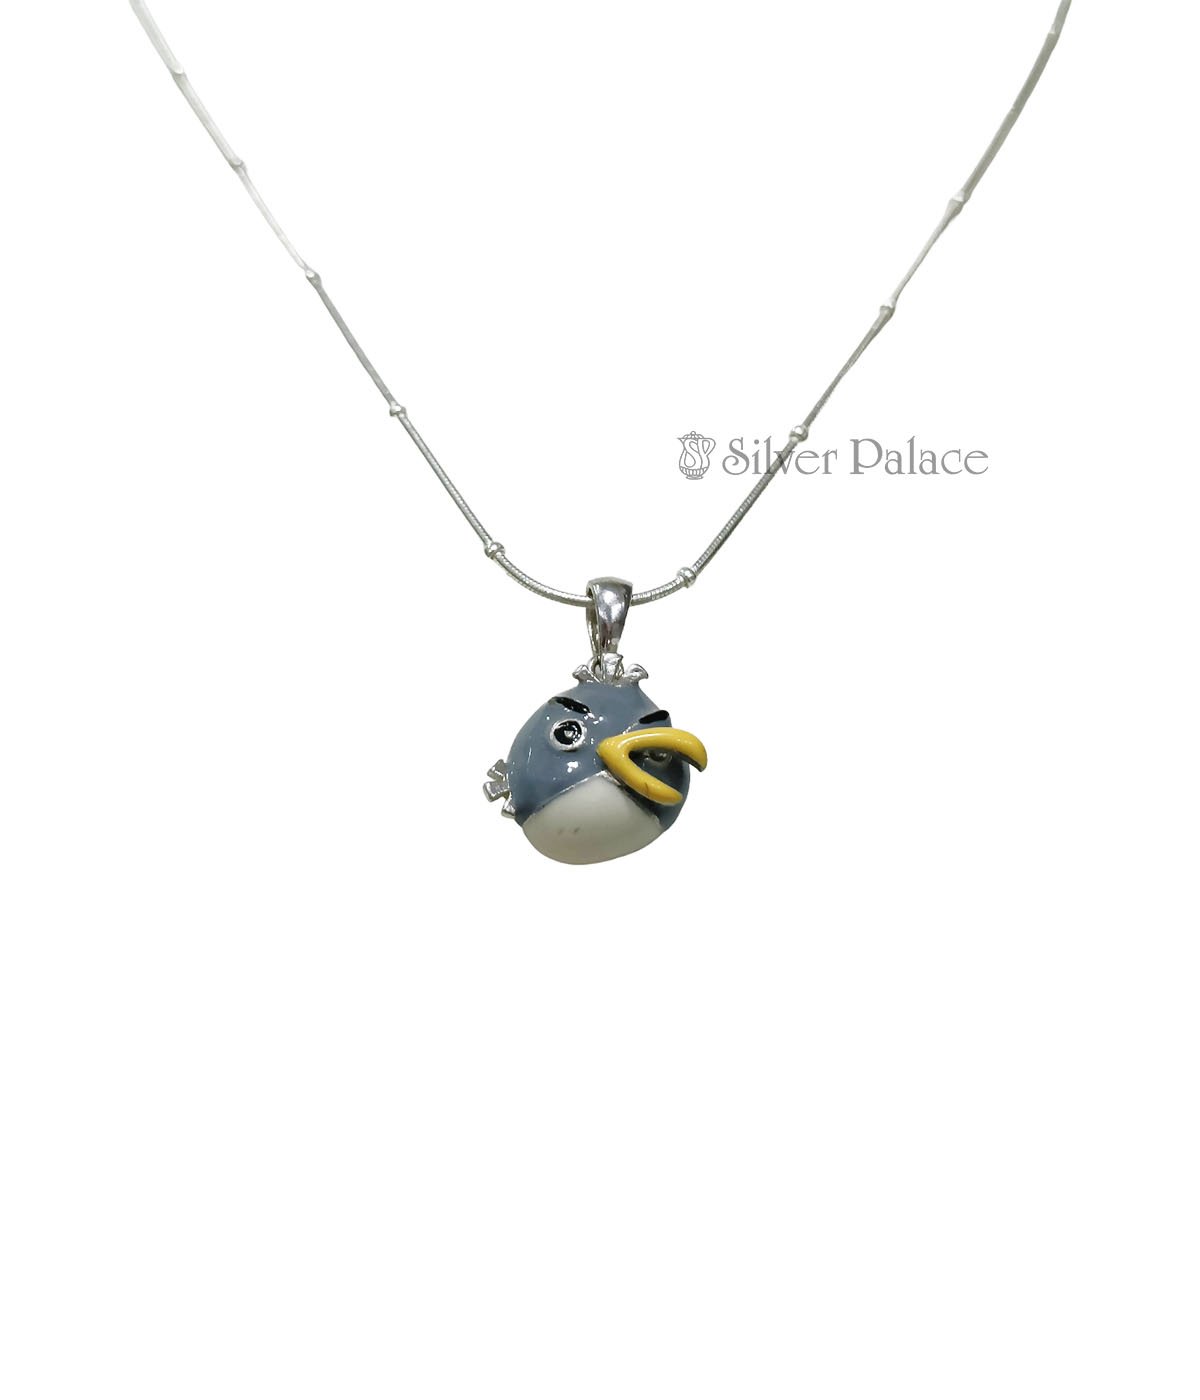 92.5 STERLING SILVER GREY ANGRY BIRD PENDANT